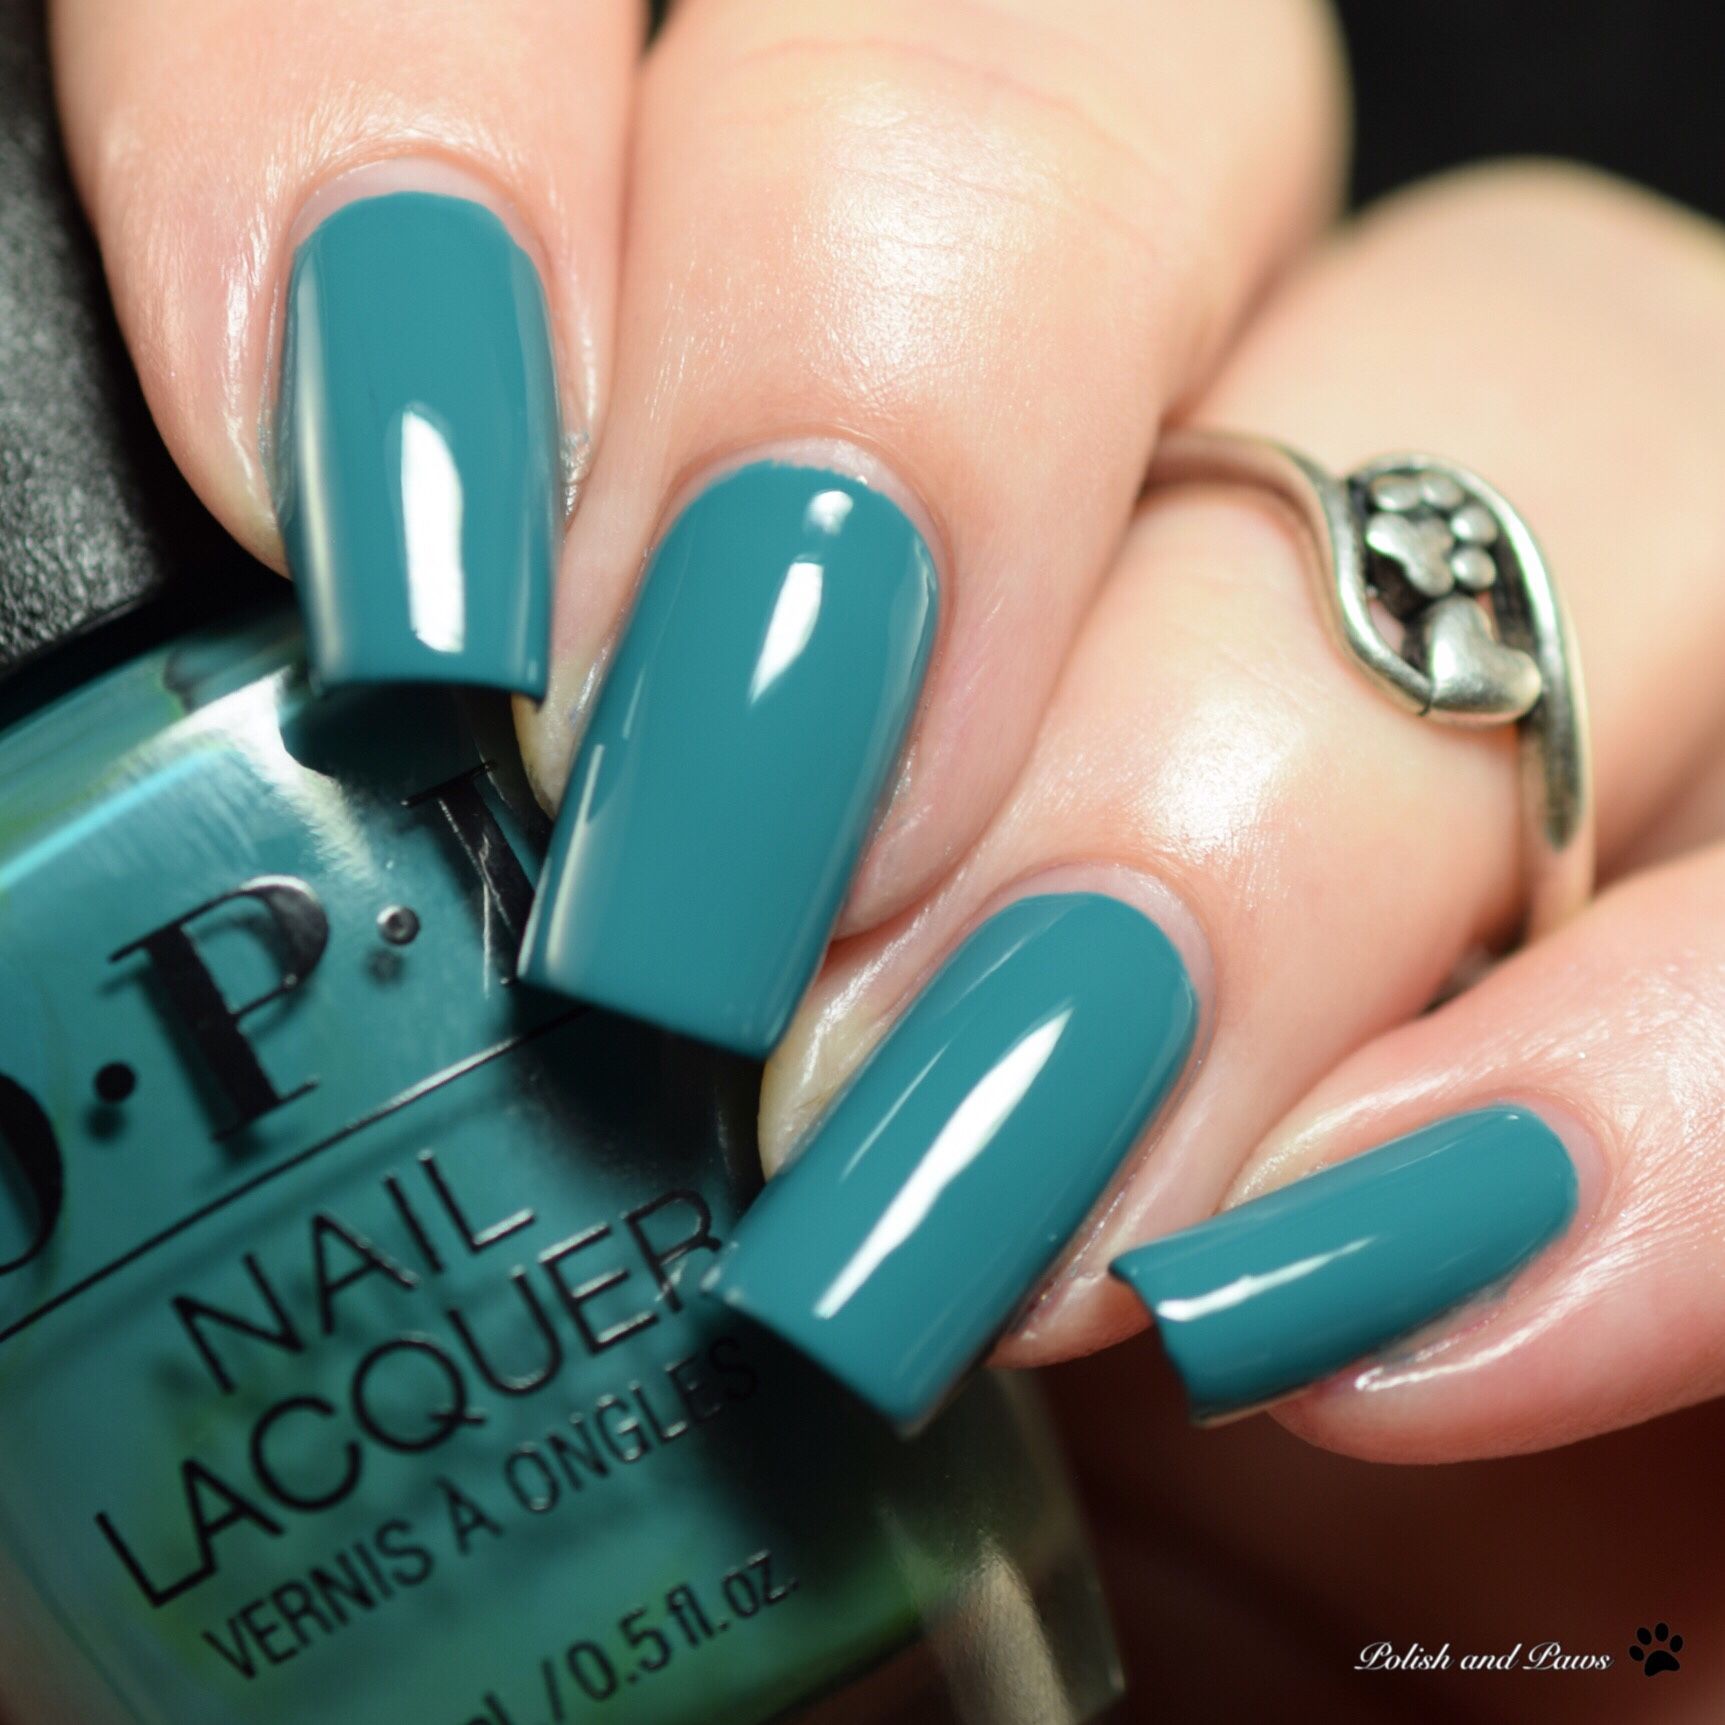 Opi Teal Me More With Image Nails